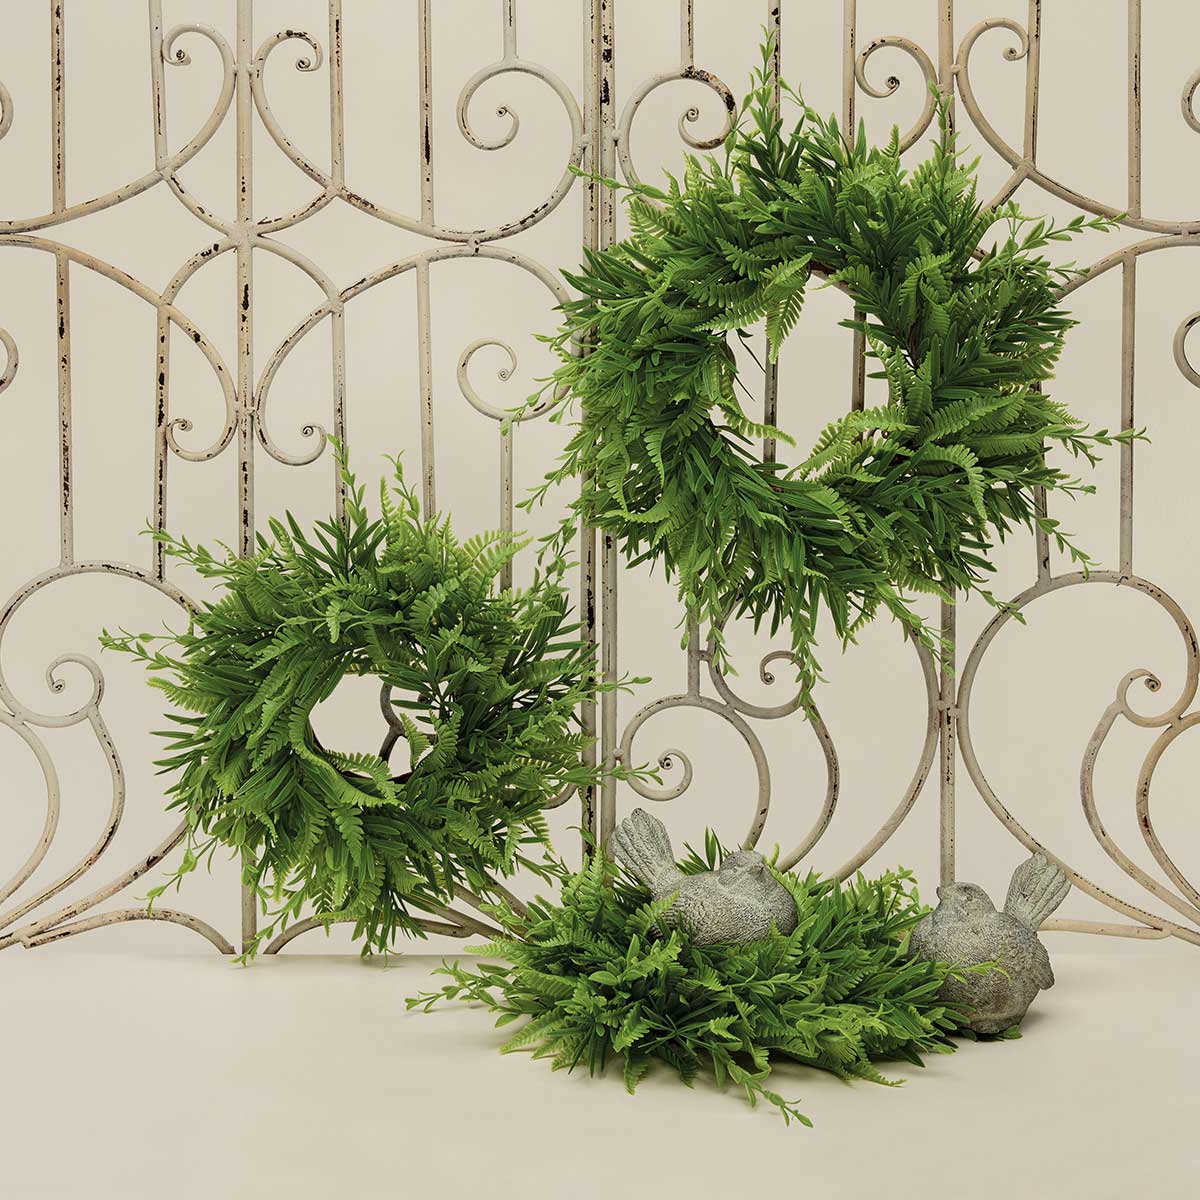 WREATH ROSEMARY/FERN 16IN (INNER RING 5.5IN) - Click Image to Close